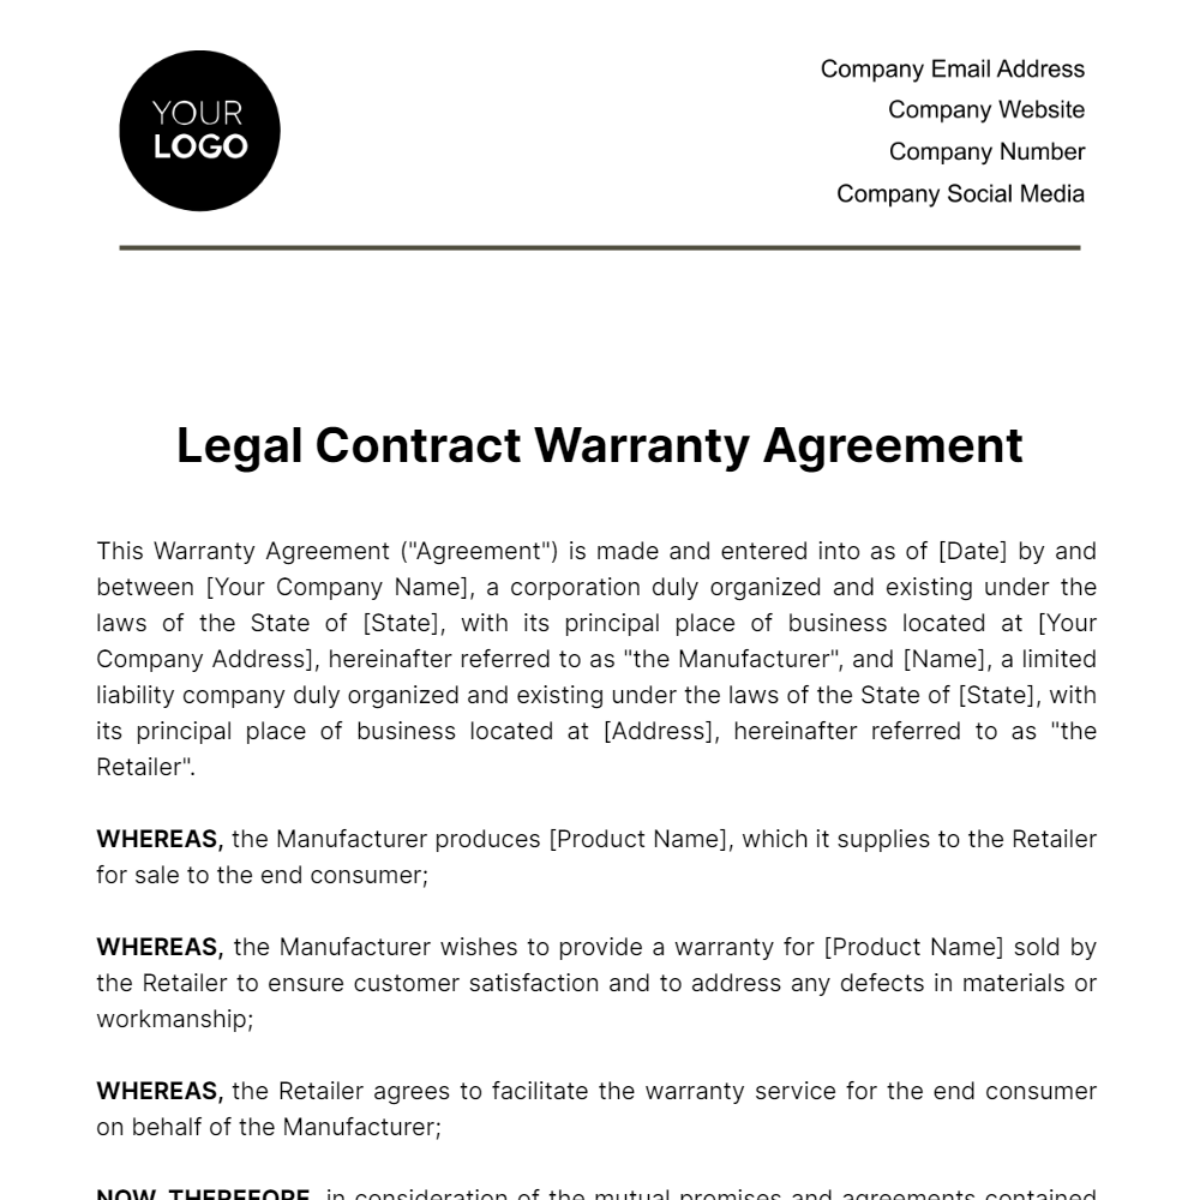 Free Legal Contract Warranty Agreement Template